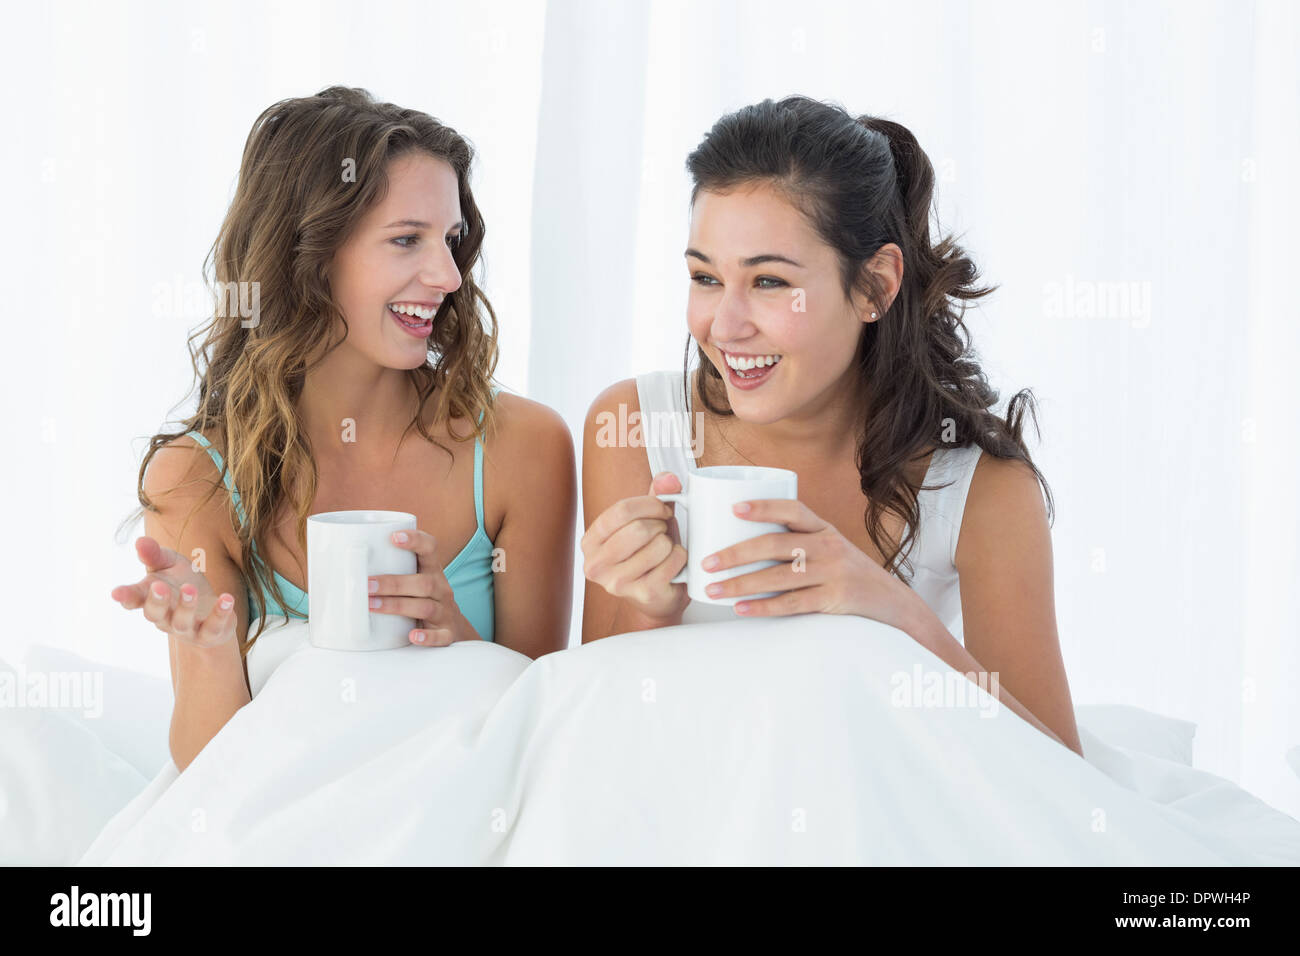 Cheerful friends with coffee cups chatting in bed Stock Photo